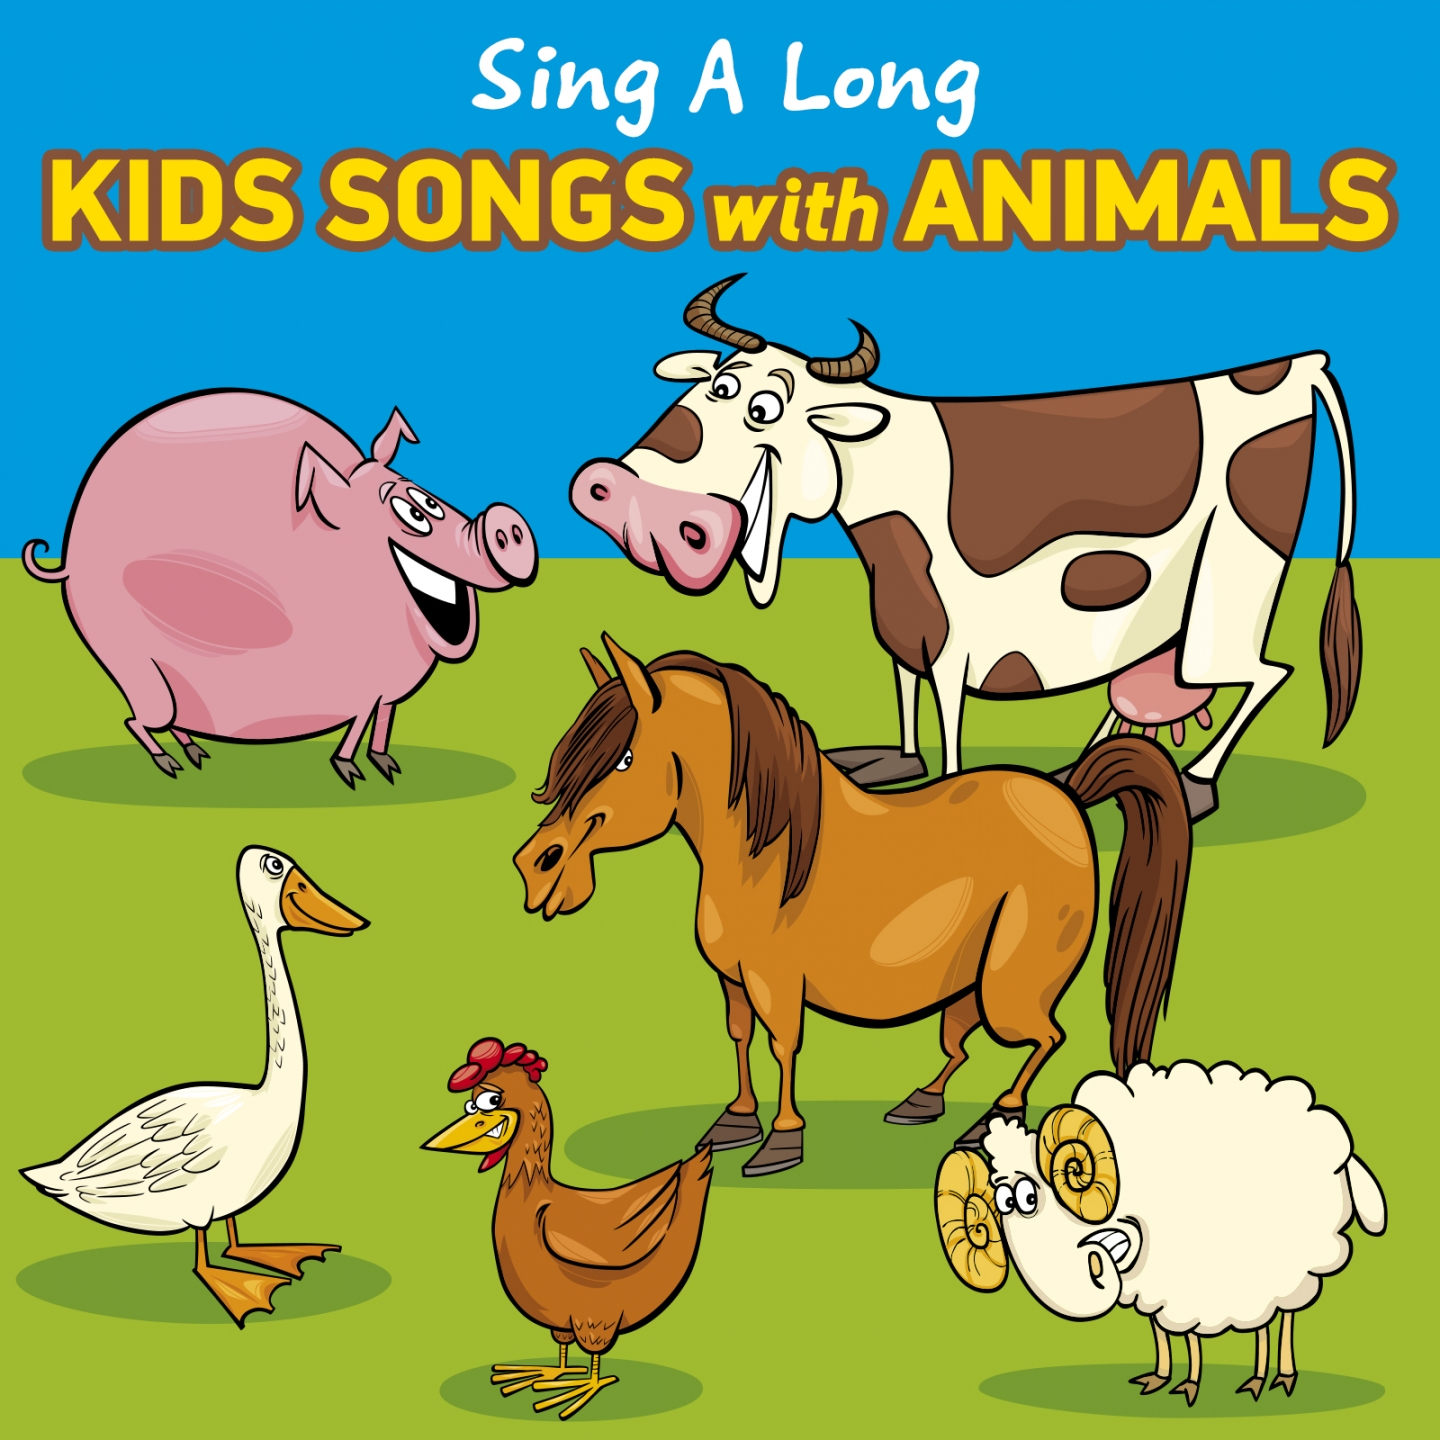 Sing a Long Kids Songs with Animals